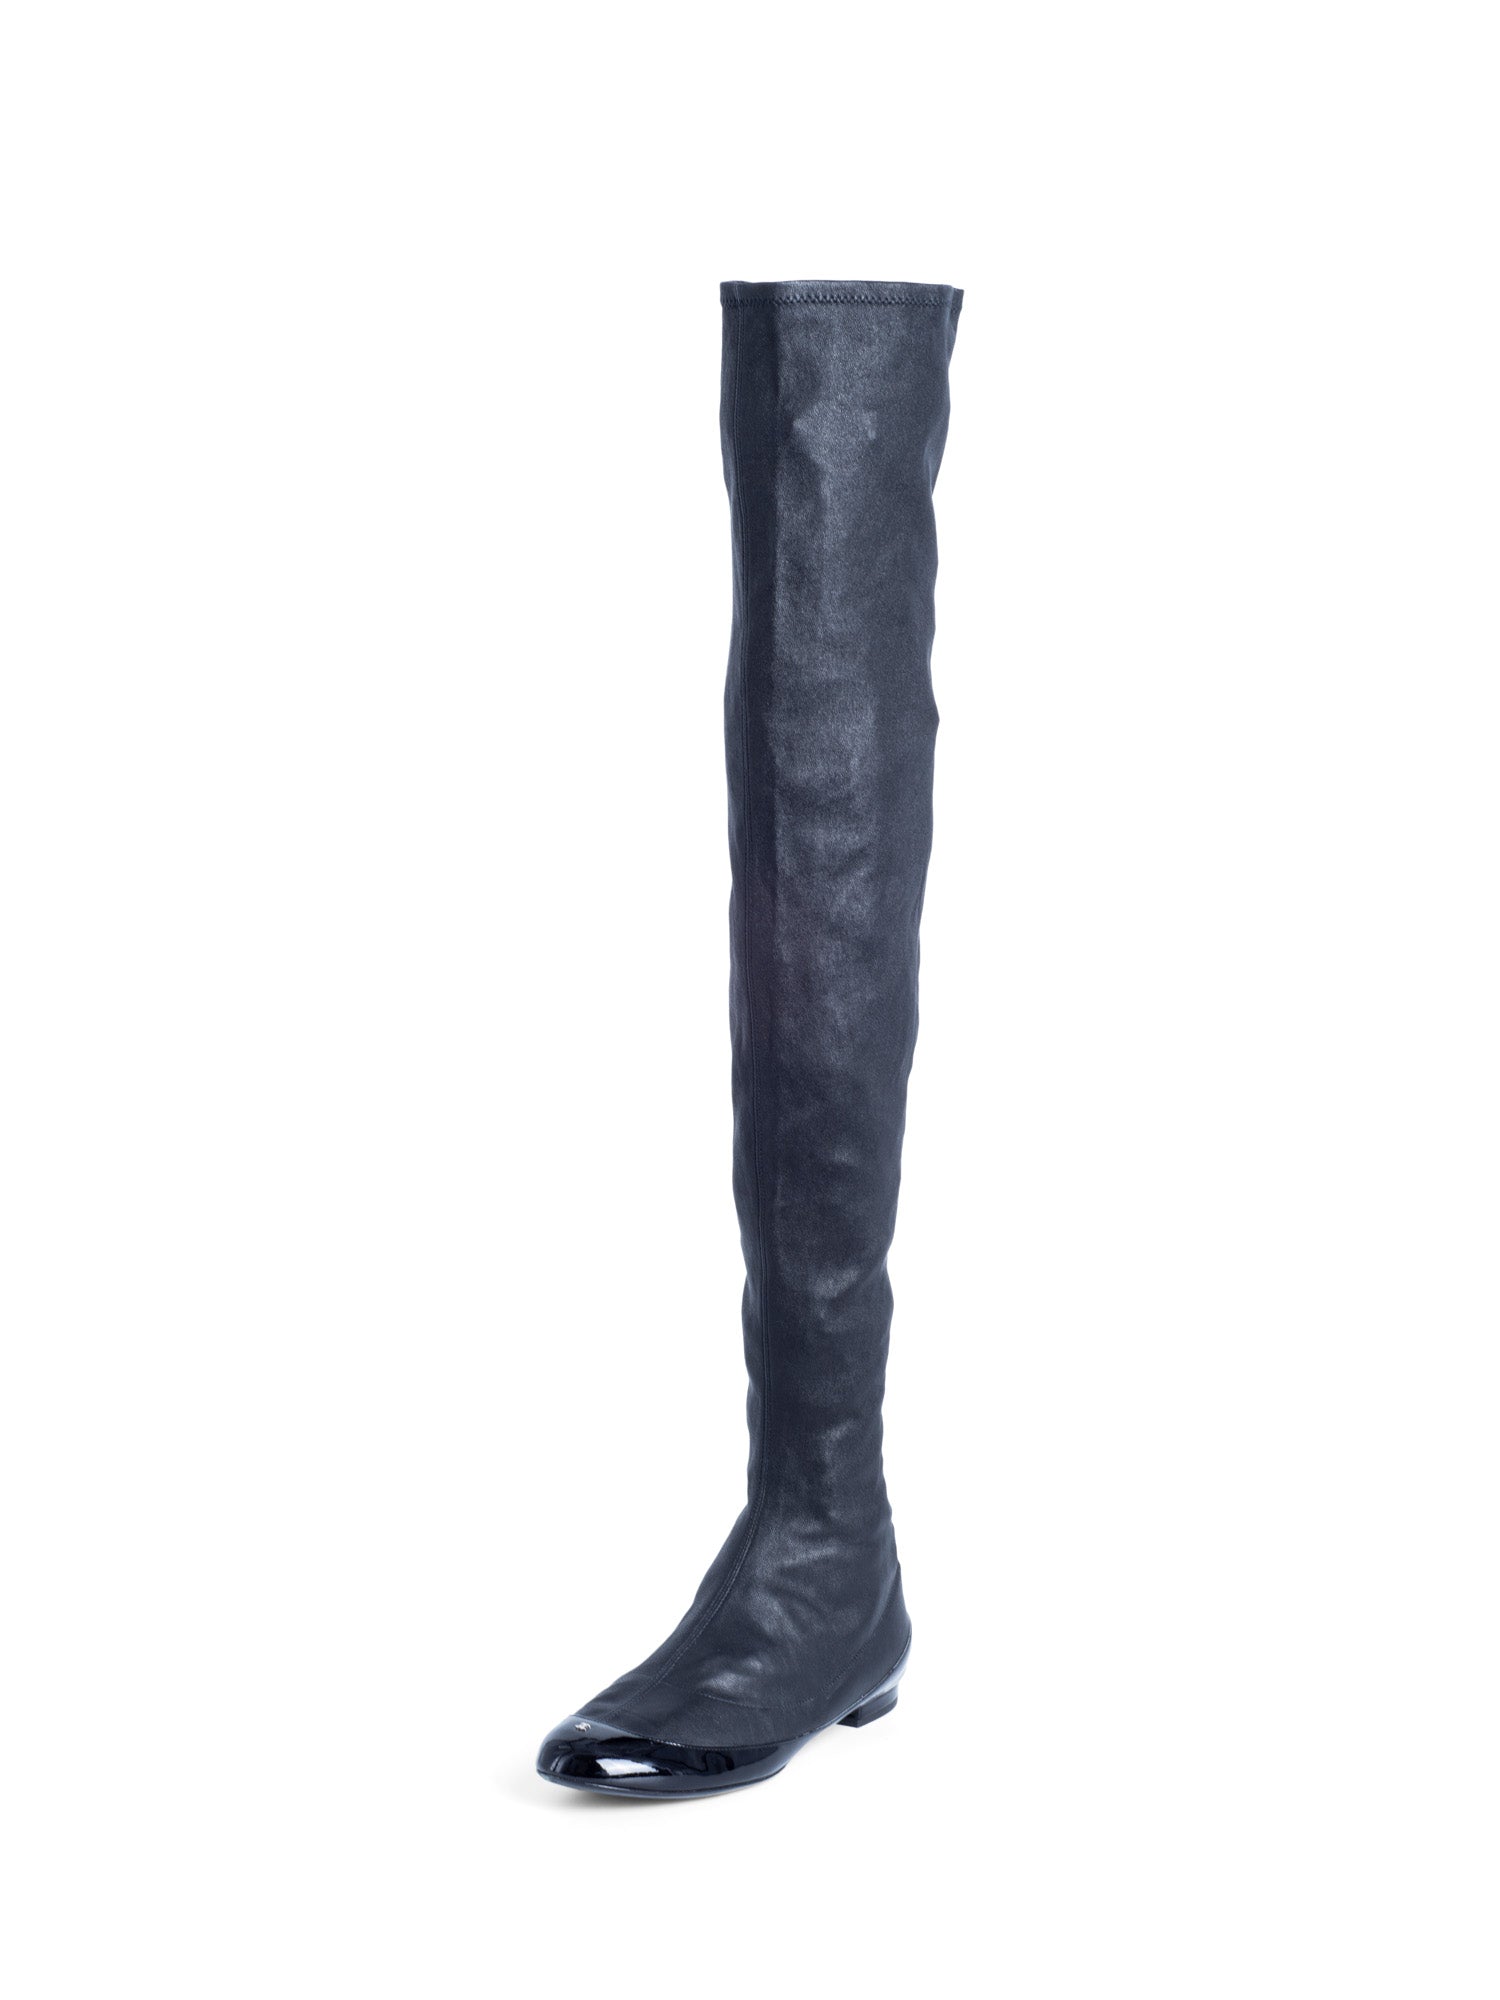 CHANEL CC Logo Stretchy Leather Cap Toe Over The Knee Boots Black-designer resale